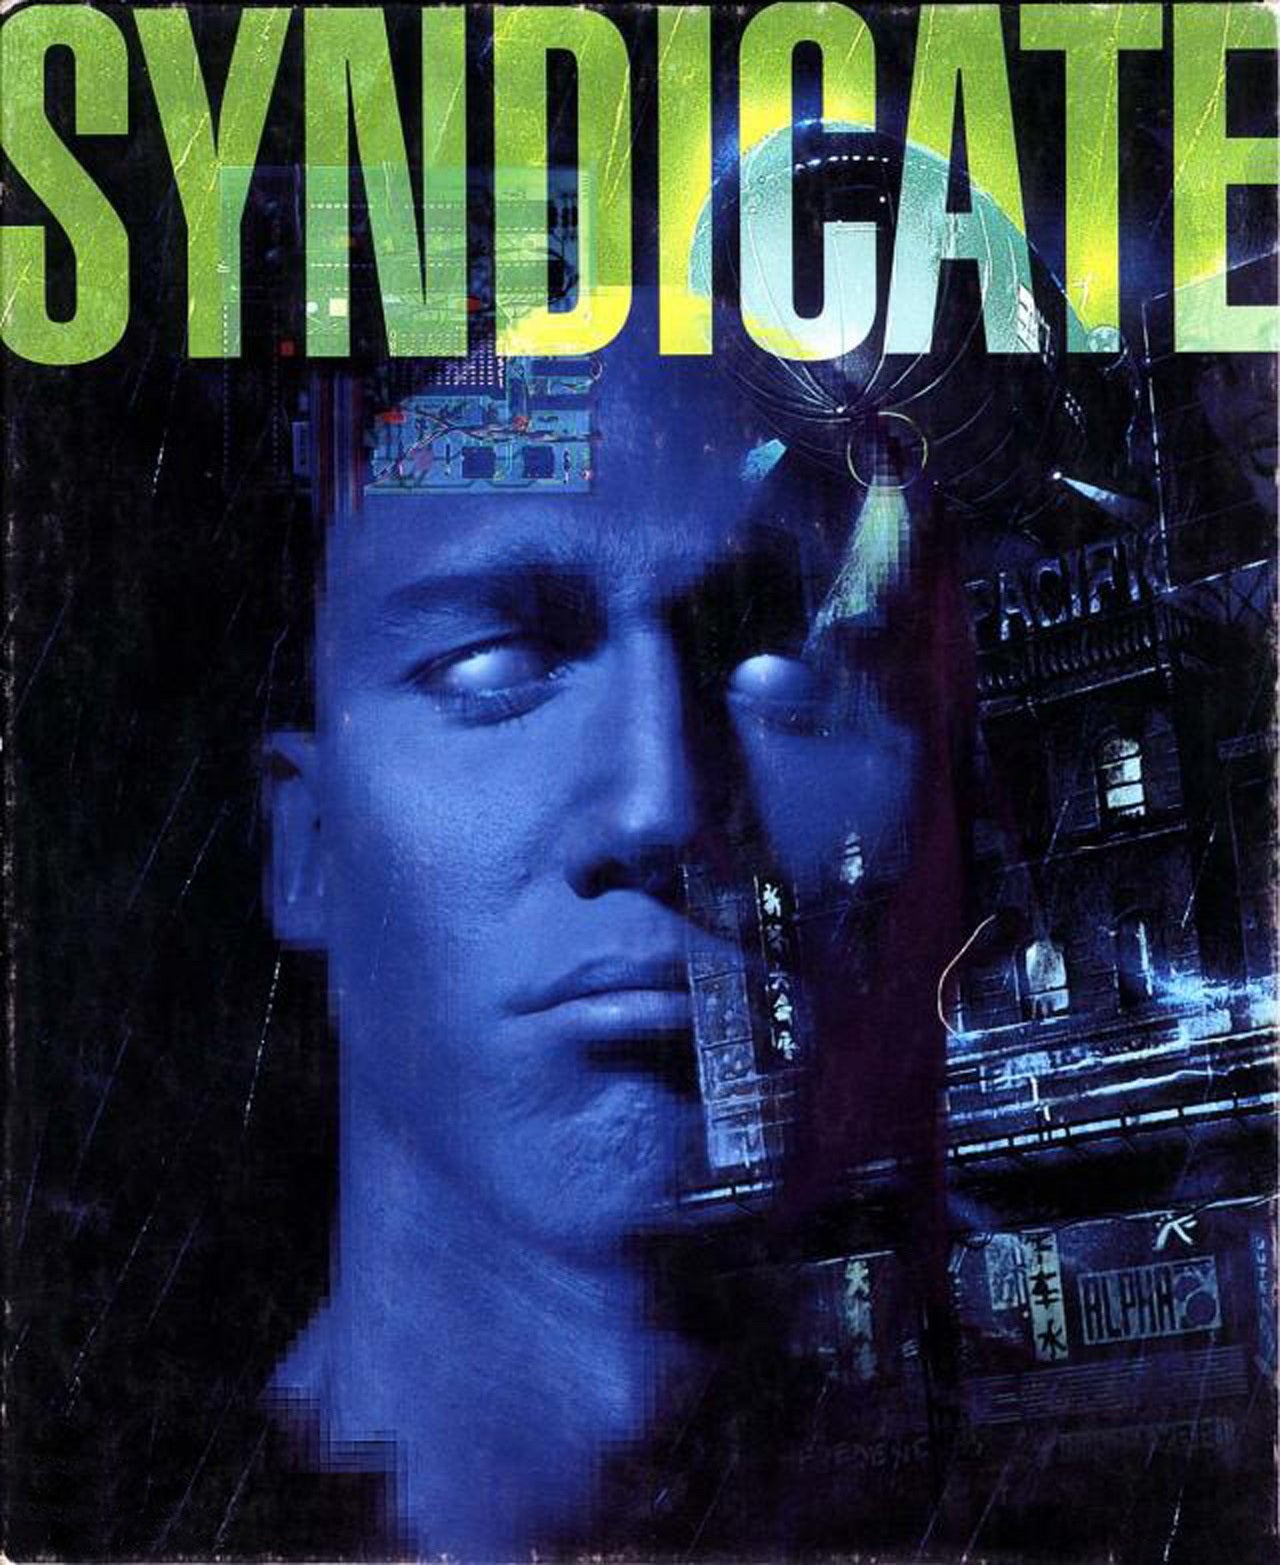 Image for Syndicate is the latest free game download on Origin